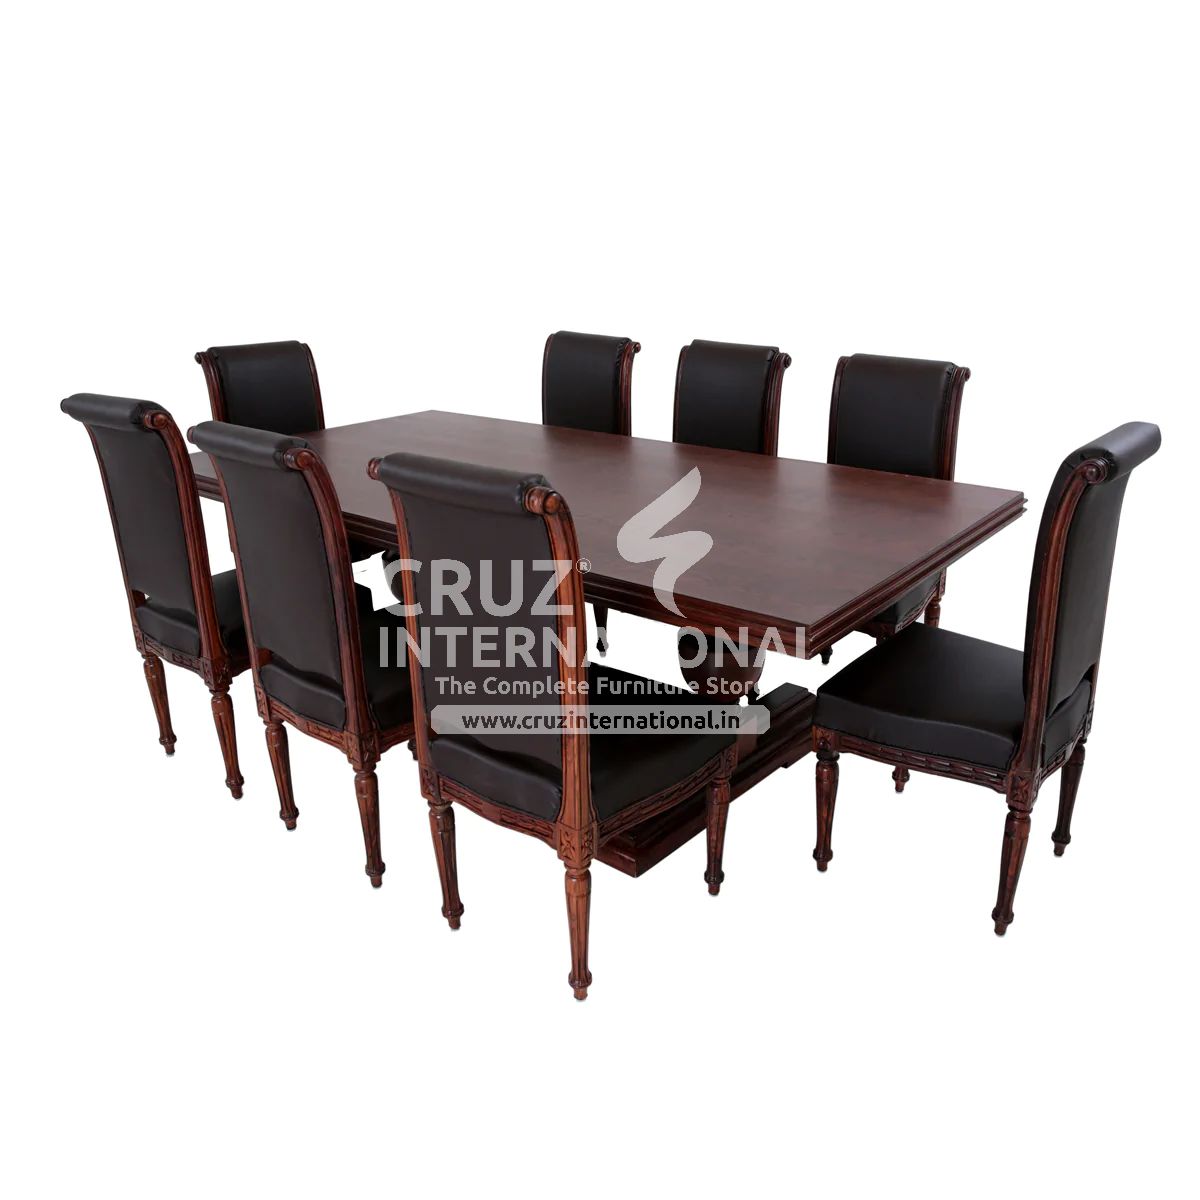 Classic James Benito Wooden Dinning Table | 8 Chairs + 1 Table CRUZ INTERNATIONAL